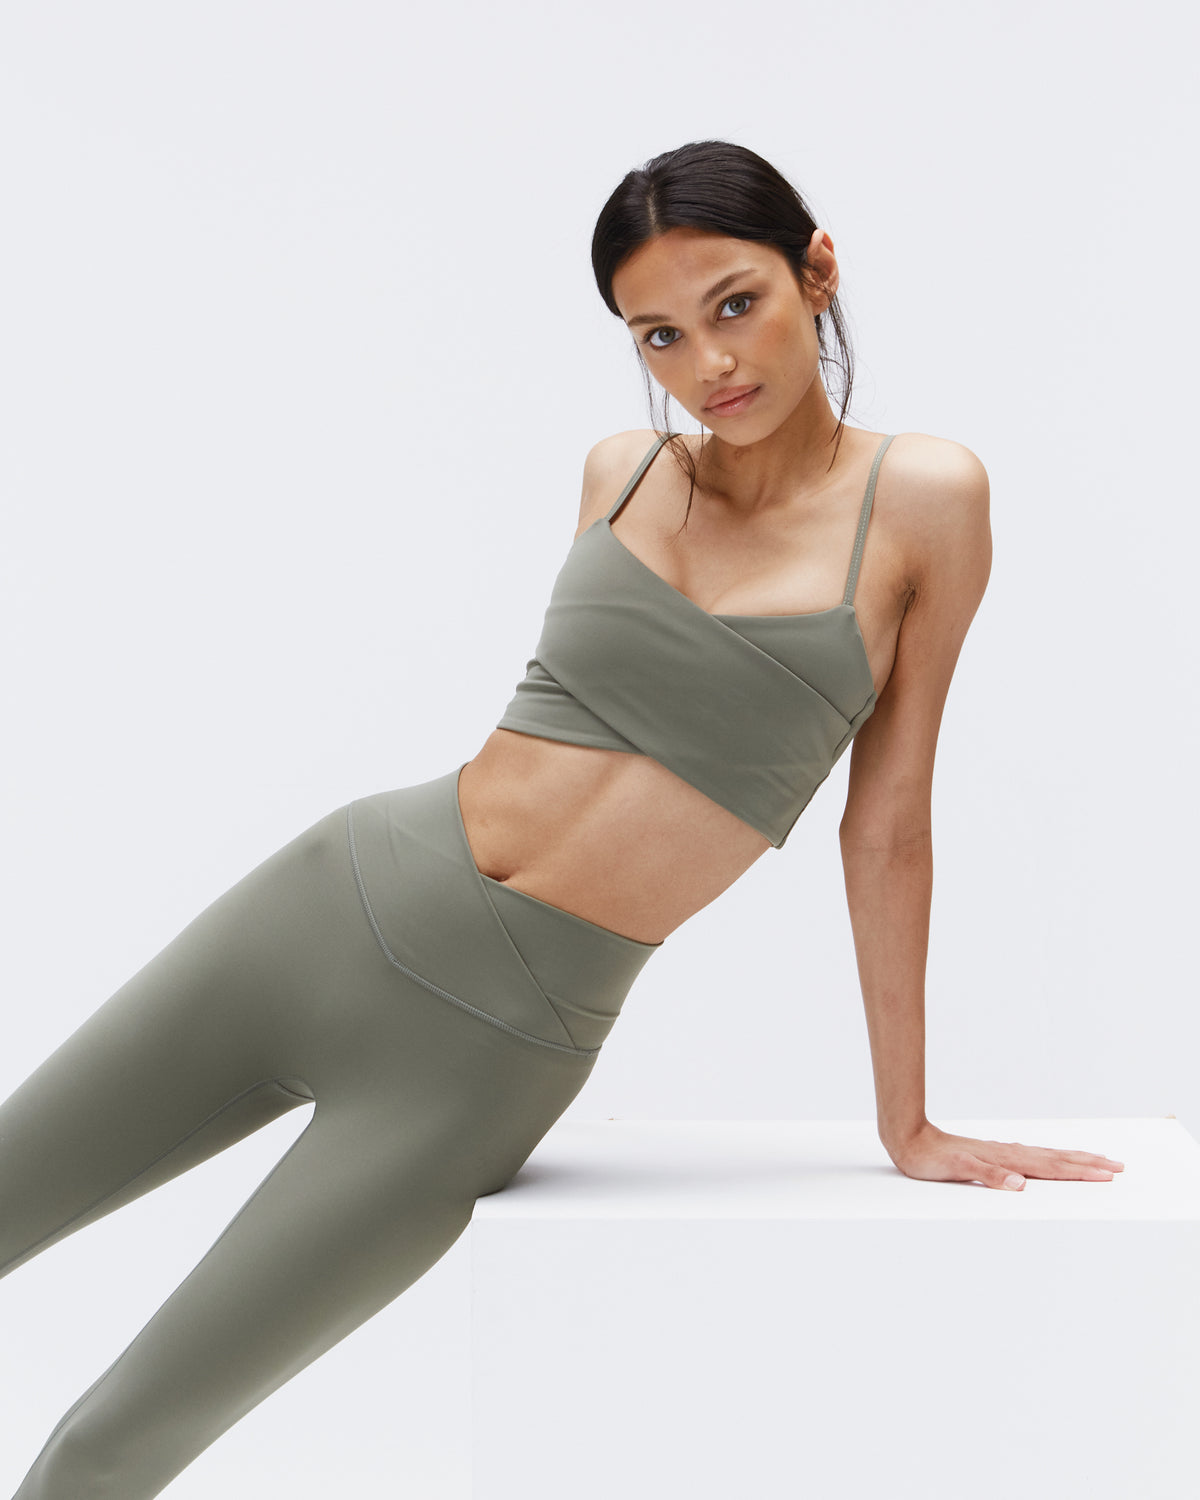 STRAPPY BRA - Bra Top, Bralette, Bustier, Yoga Top - with Lace - olive green